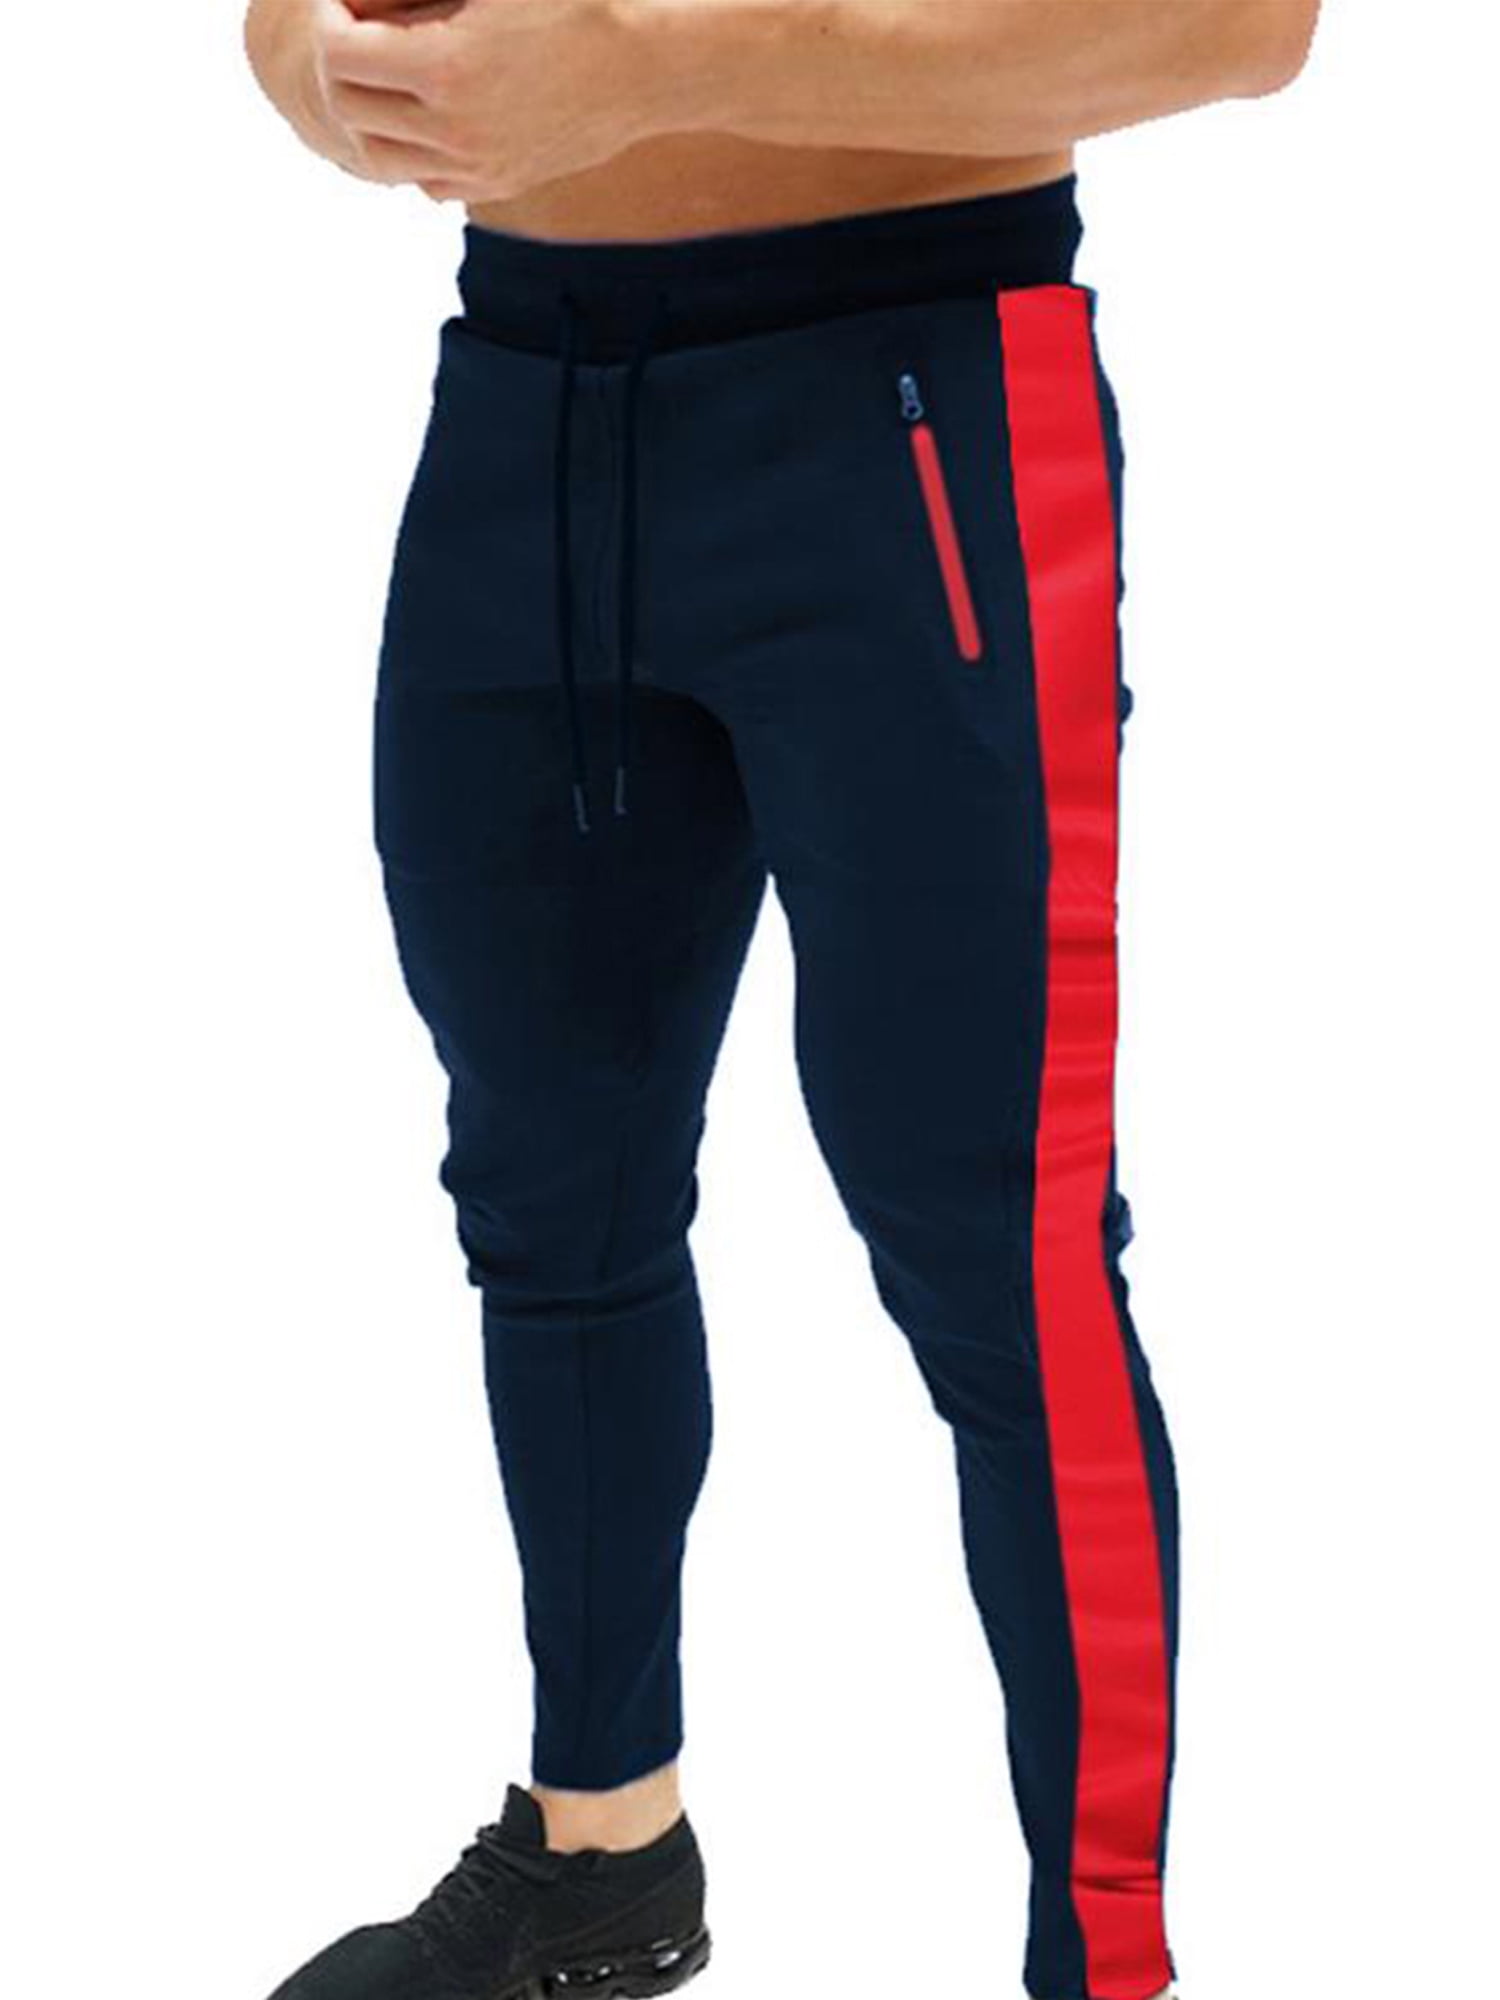 UPAIRC Mens Sports Gym Joggers Pants Casual Slim Fit Trousers Sweatpants  Elastic Wasit Tracksuit Bottoms 